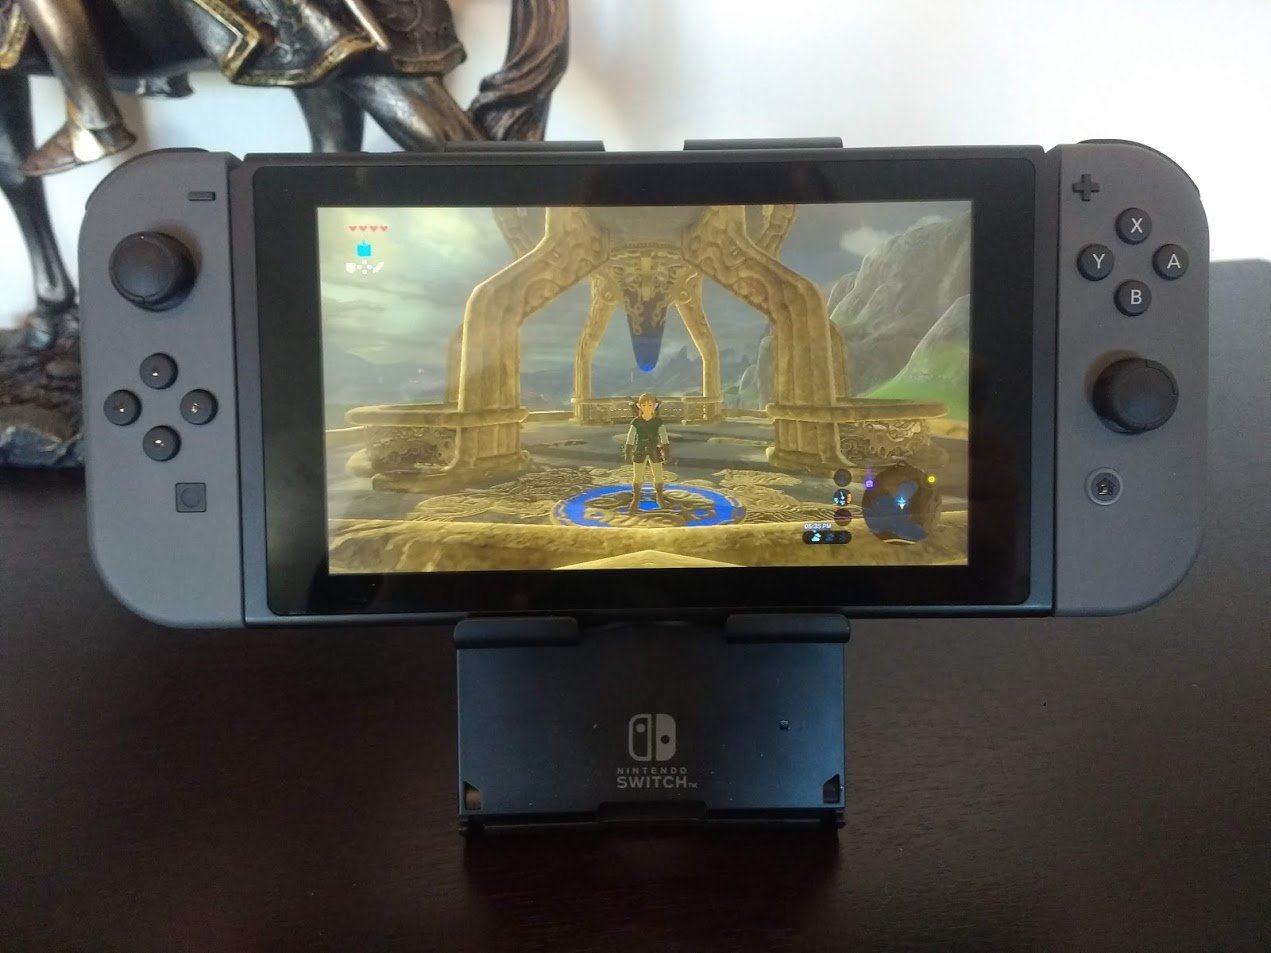 The Legend of Zelda: Breath of the Wild on the new Nintendo Switch V2